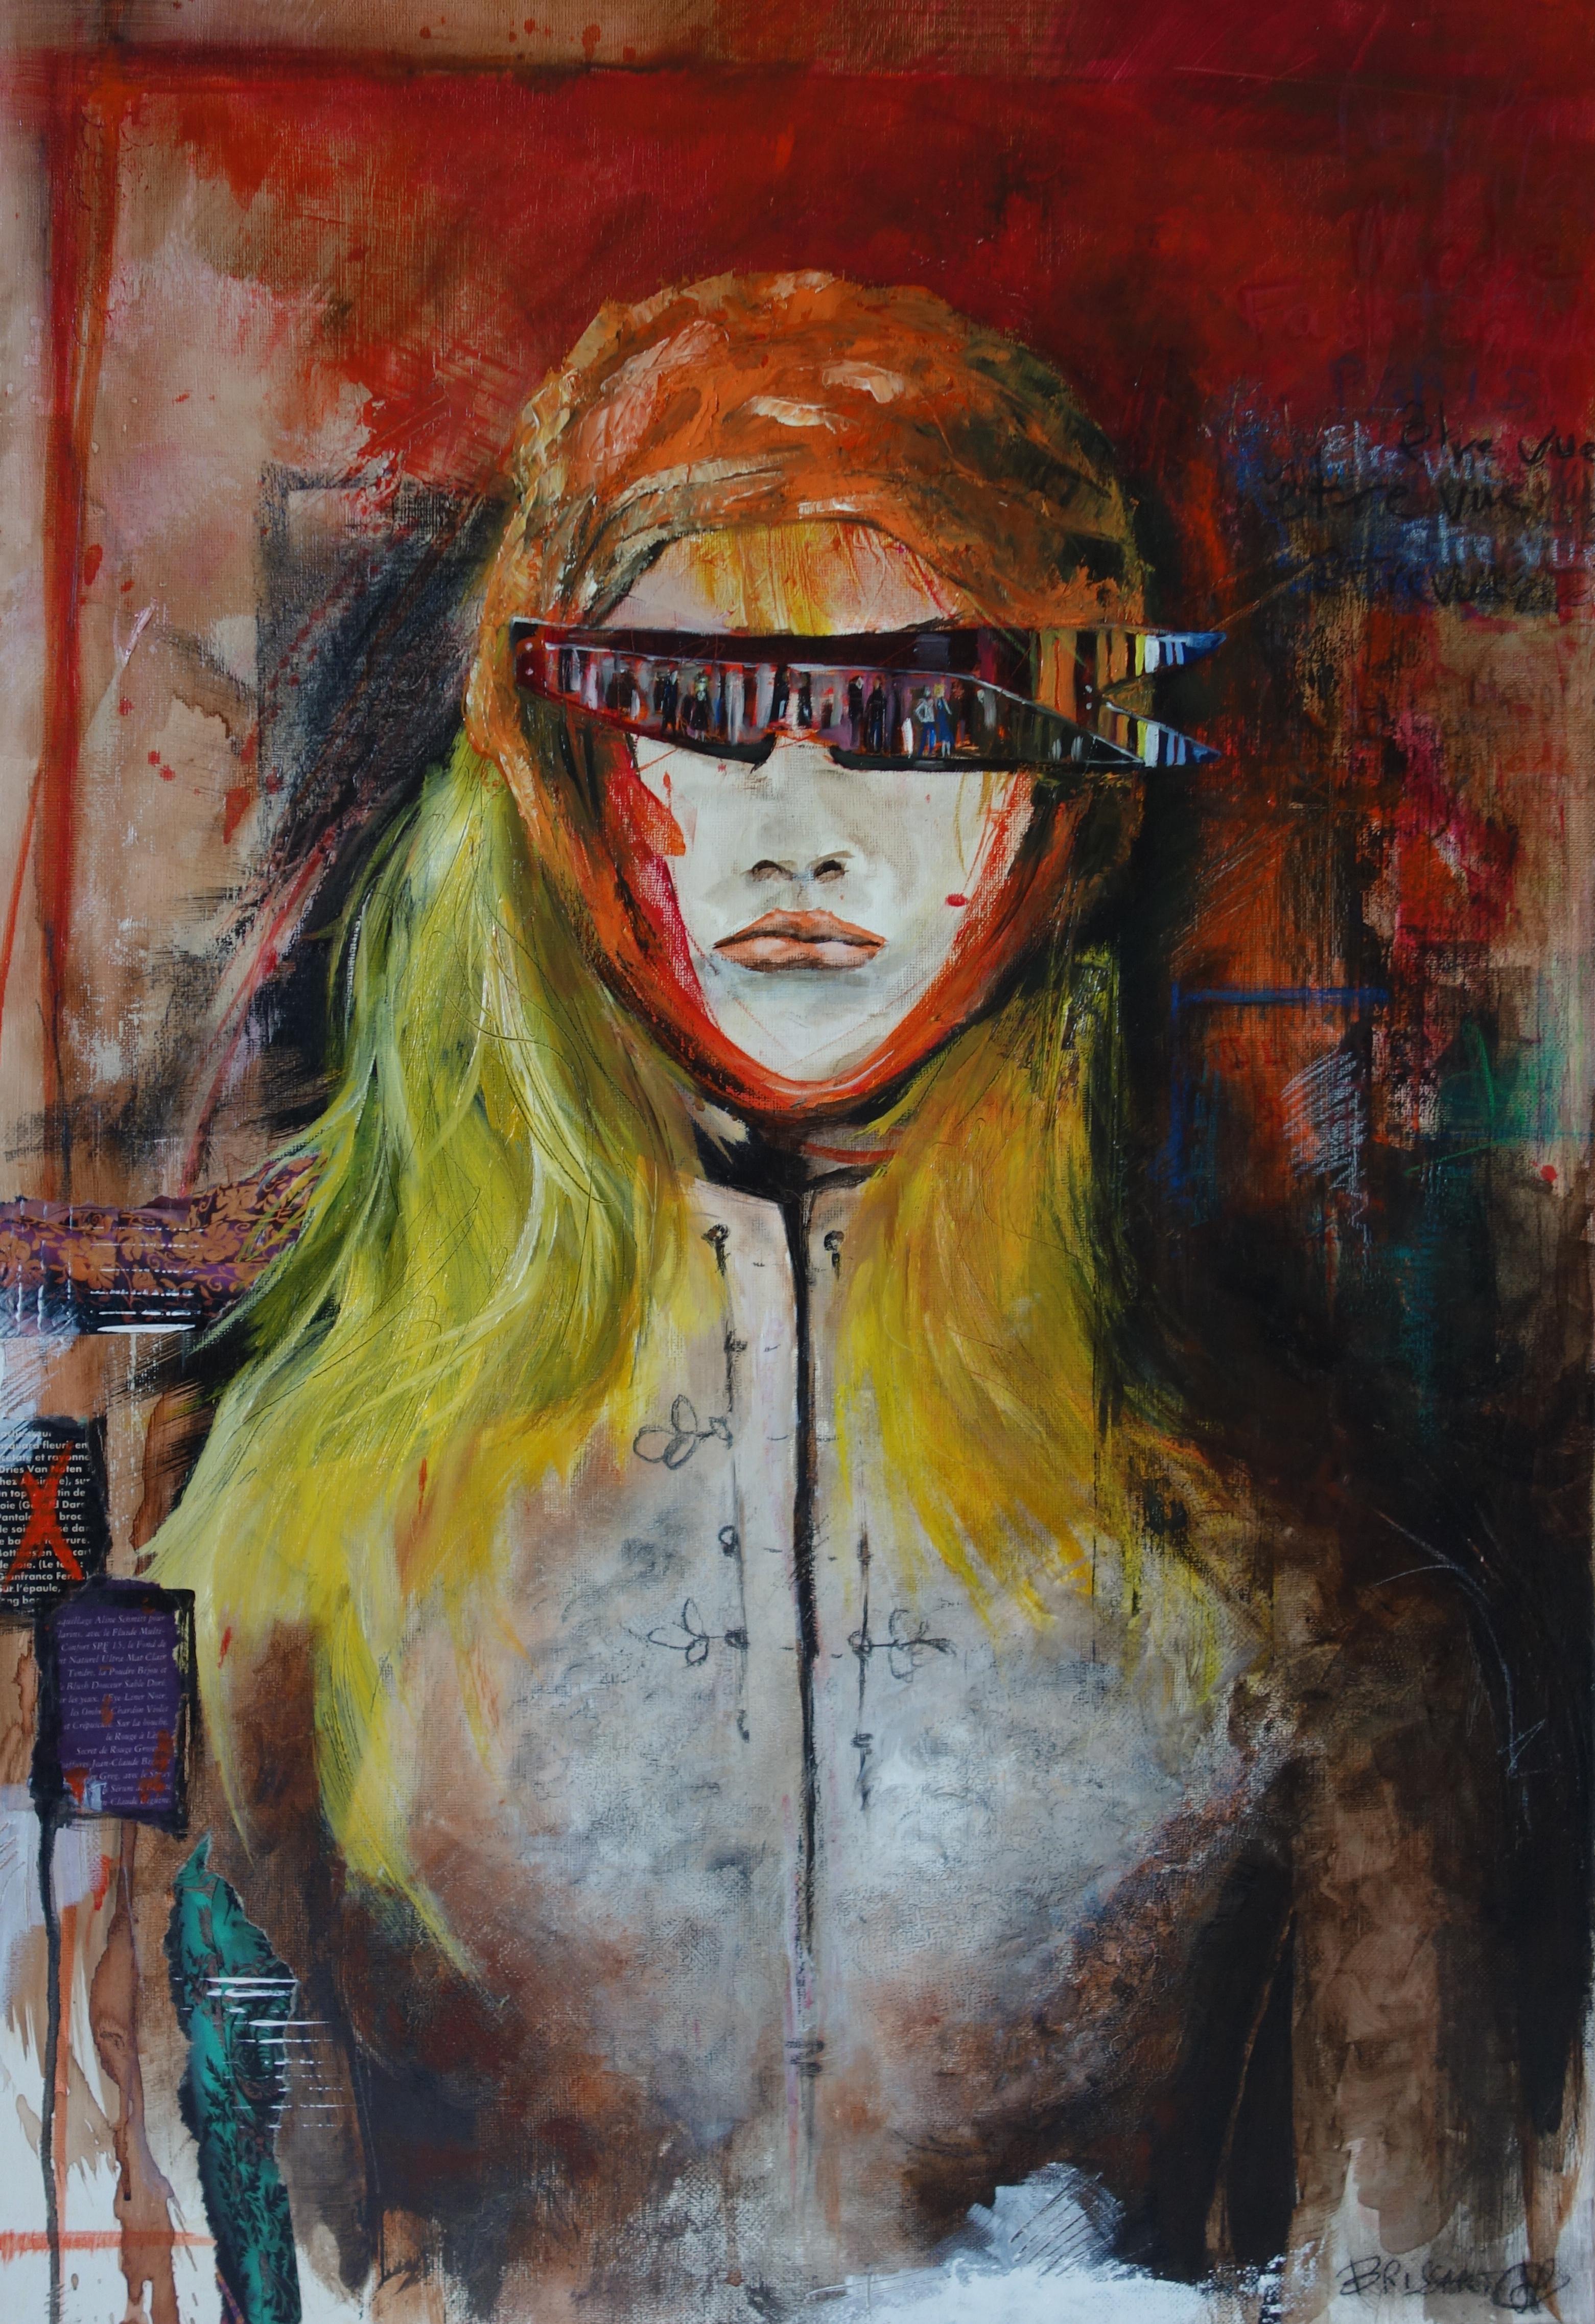 Jean-Pierre Brissart Figurative Painting - The woman with glasses